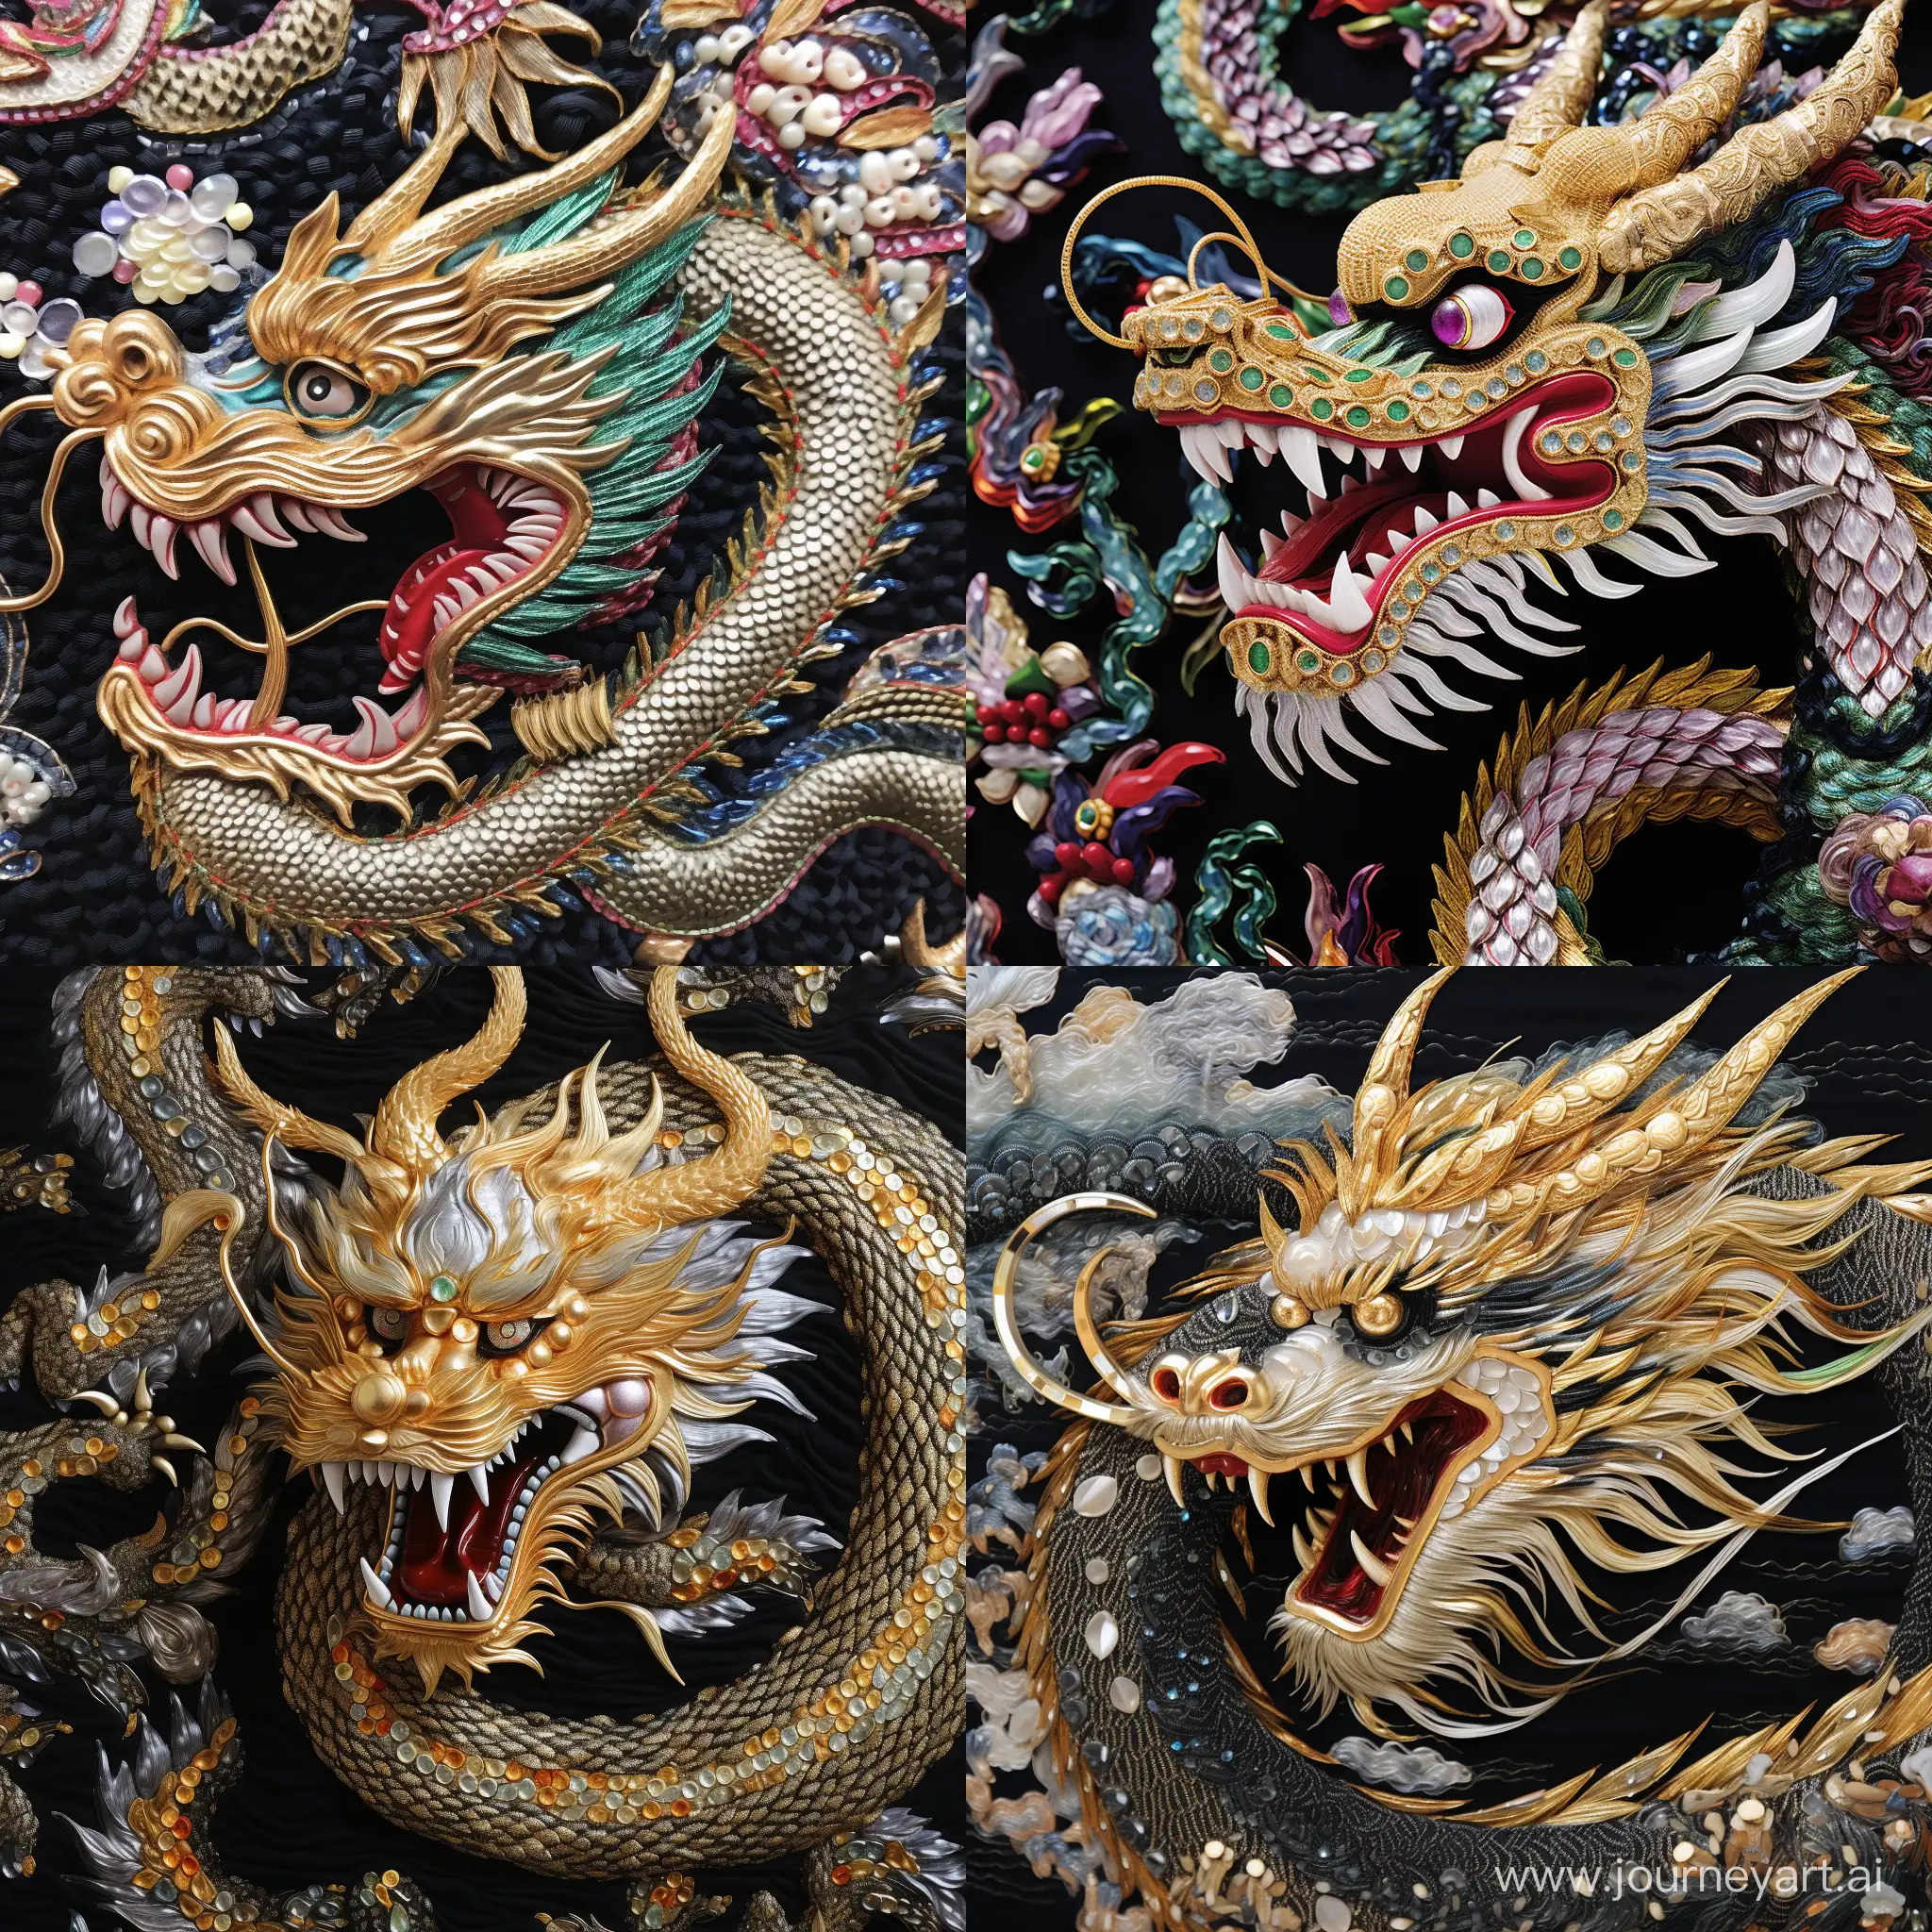 Japanese dragon, Glas beads embroidery , miyuki Rocailles, Sequins embroidery, rhinestones,  French Bullion Wire, spangle , full-size dragon, 64K, iconic shapes and patterns, sharp focus, Ai masterpiece Japanese dragon, Glas beads embroidery , miyuki Rocailles, Sequins embroidery, rhinestones,  French Bullion Wire, spangle , full-size dragon, 64K, iconic shapes and patterns, sharp focus, Ai masterpiece